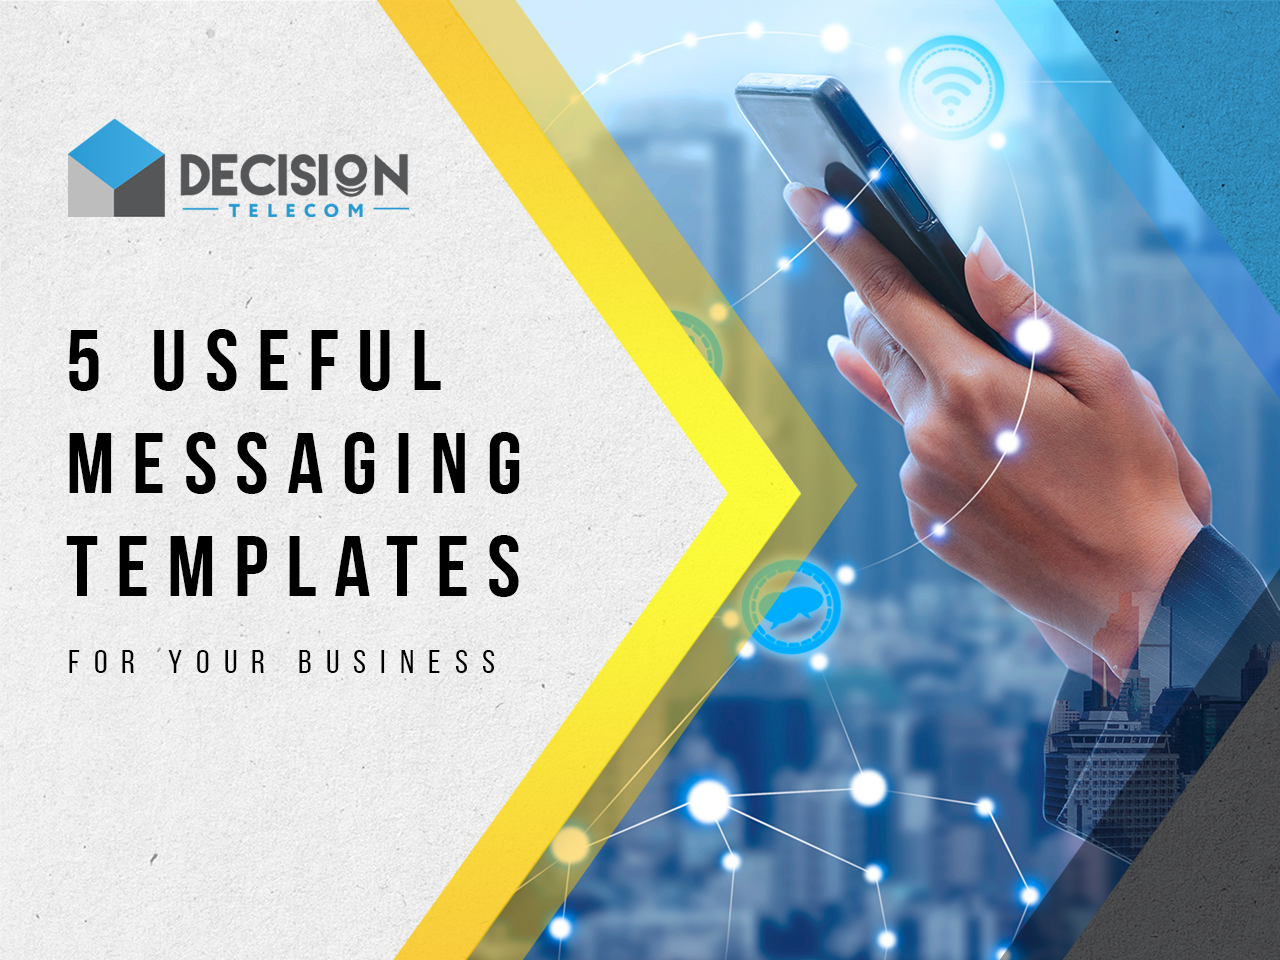  5 Useful Messaging Templates for your Business 